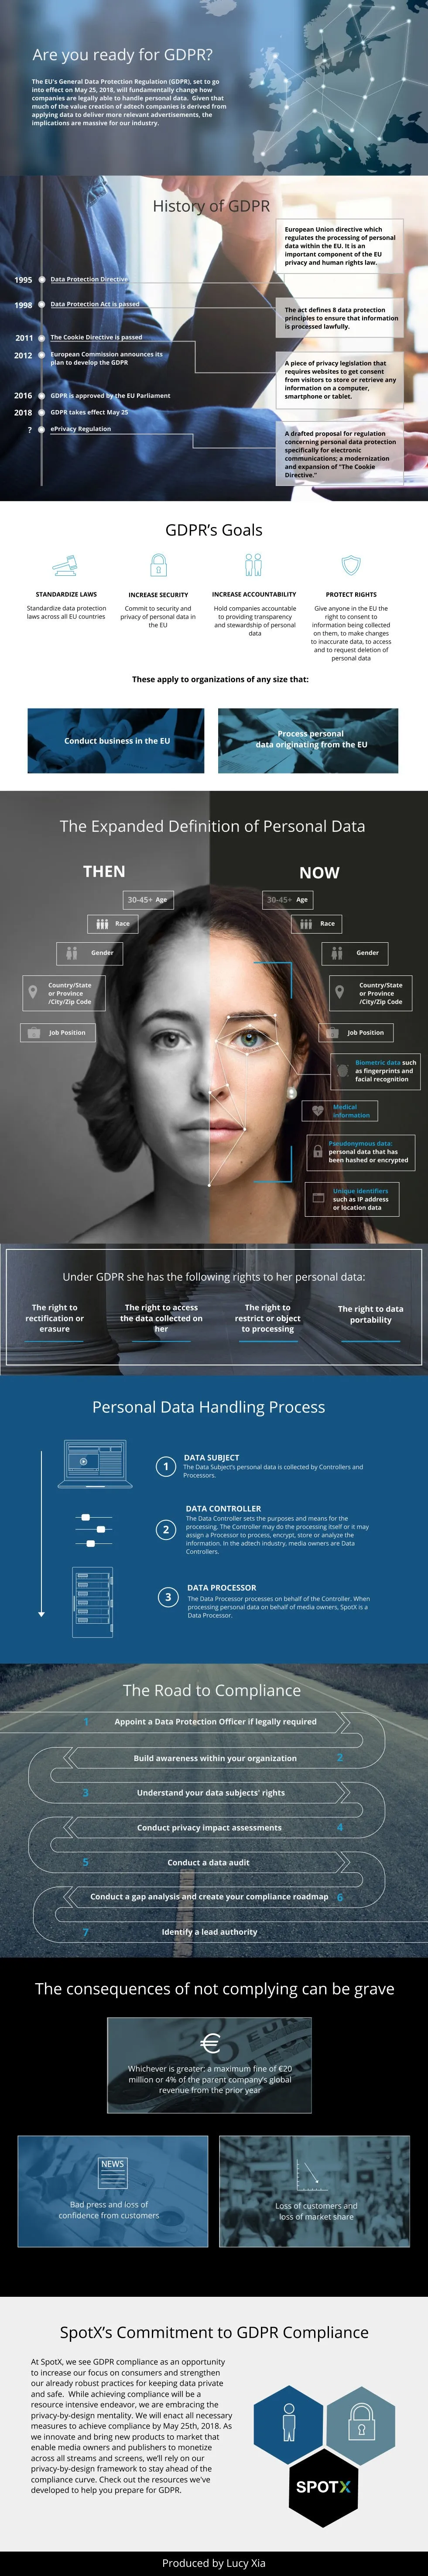 Are You Ready for GDPR? [Infographic]